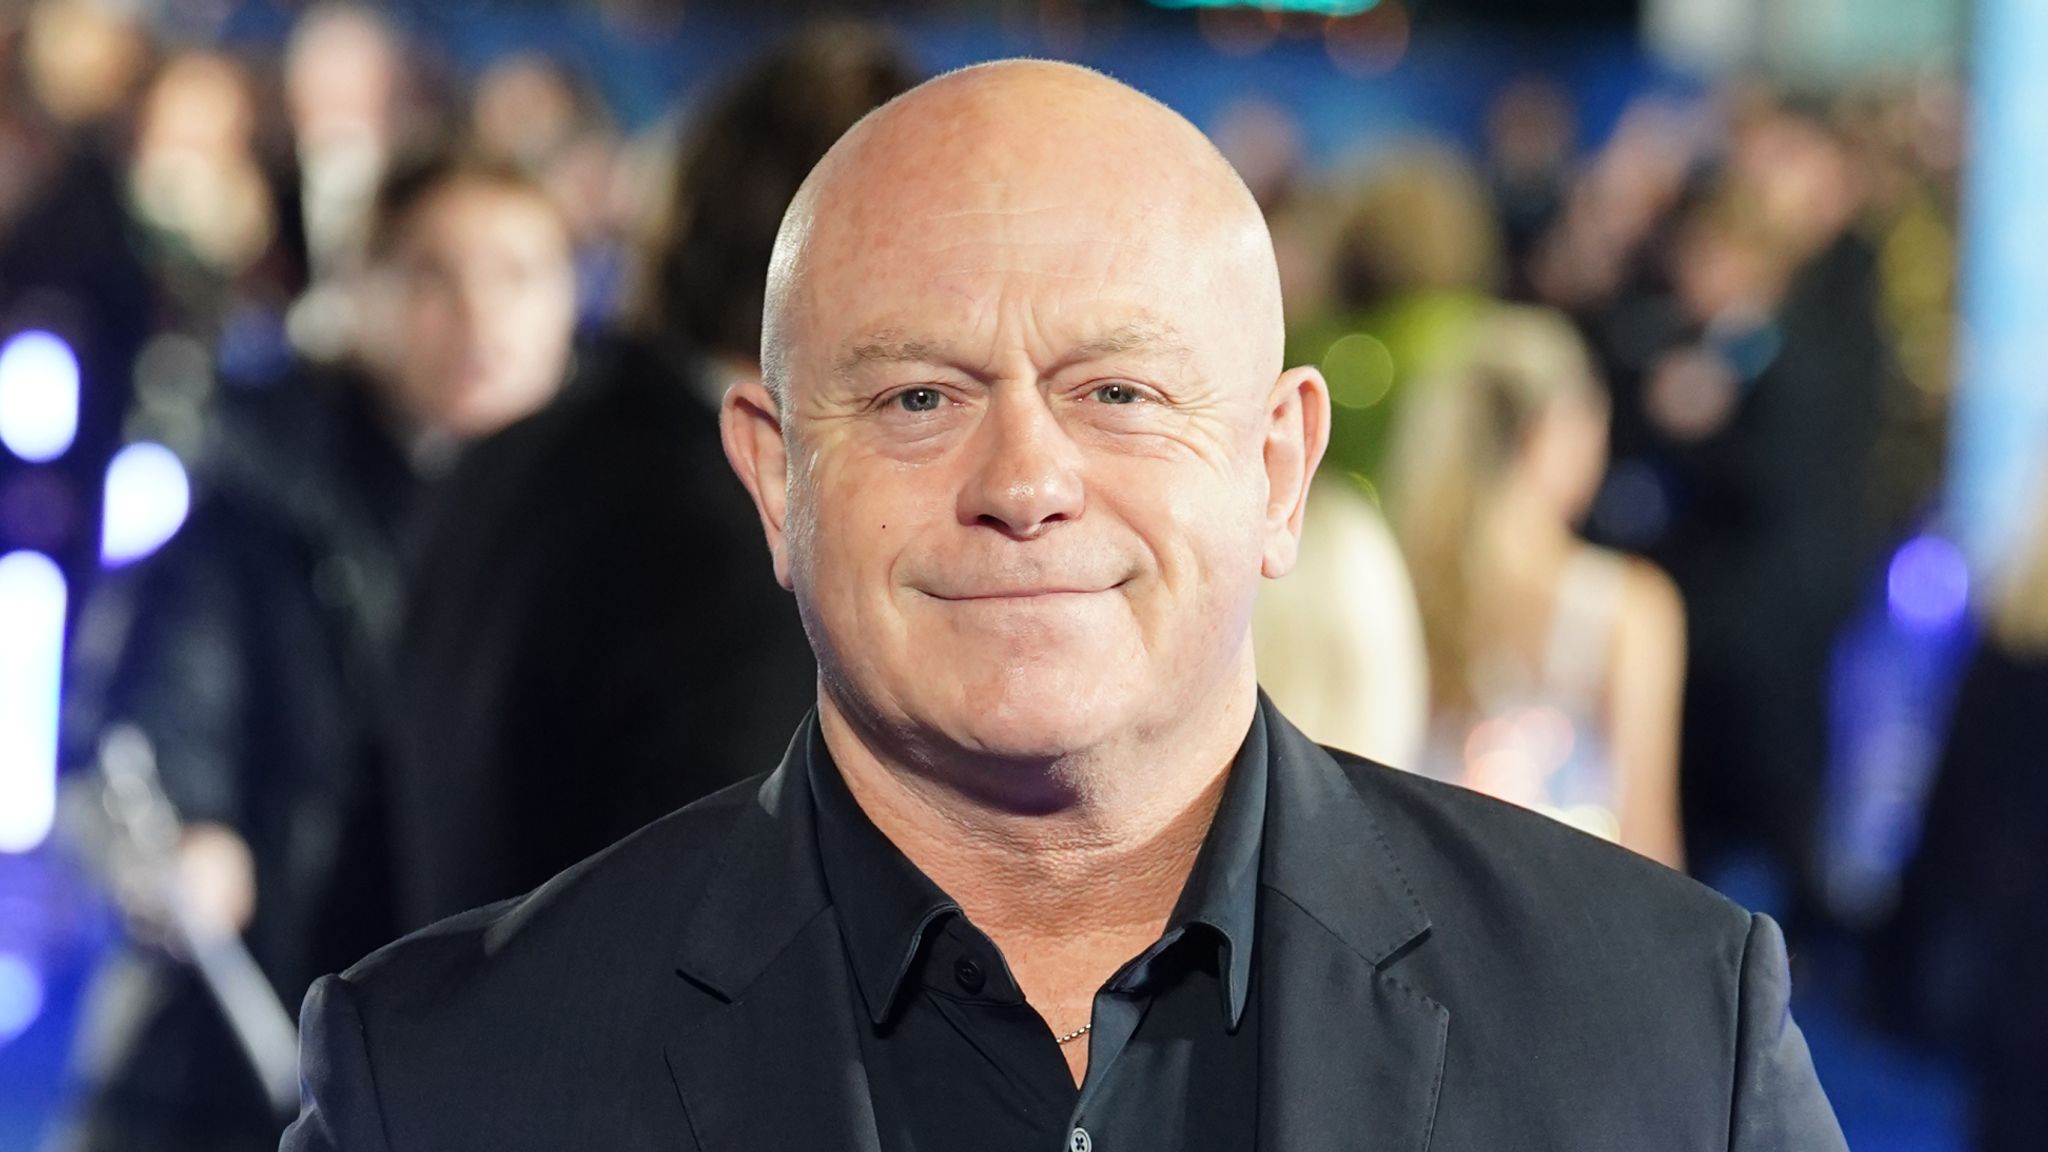 Ross Kemp turned down OceanGate submersible trip to Titanic wreck